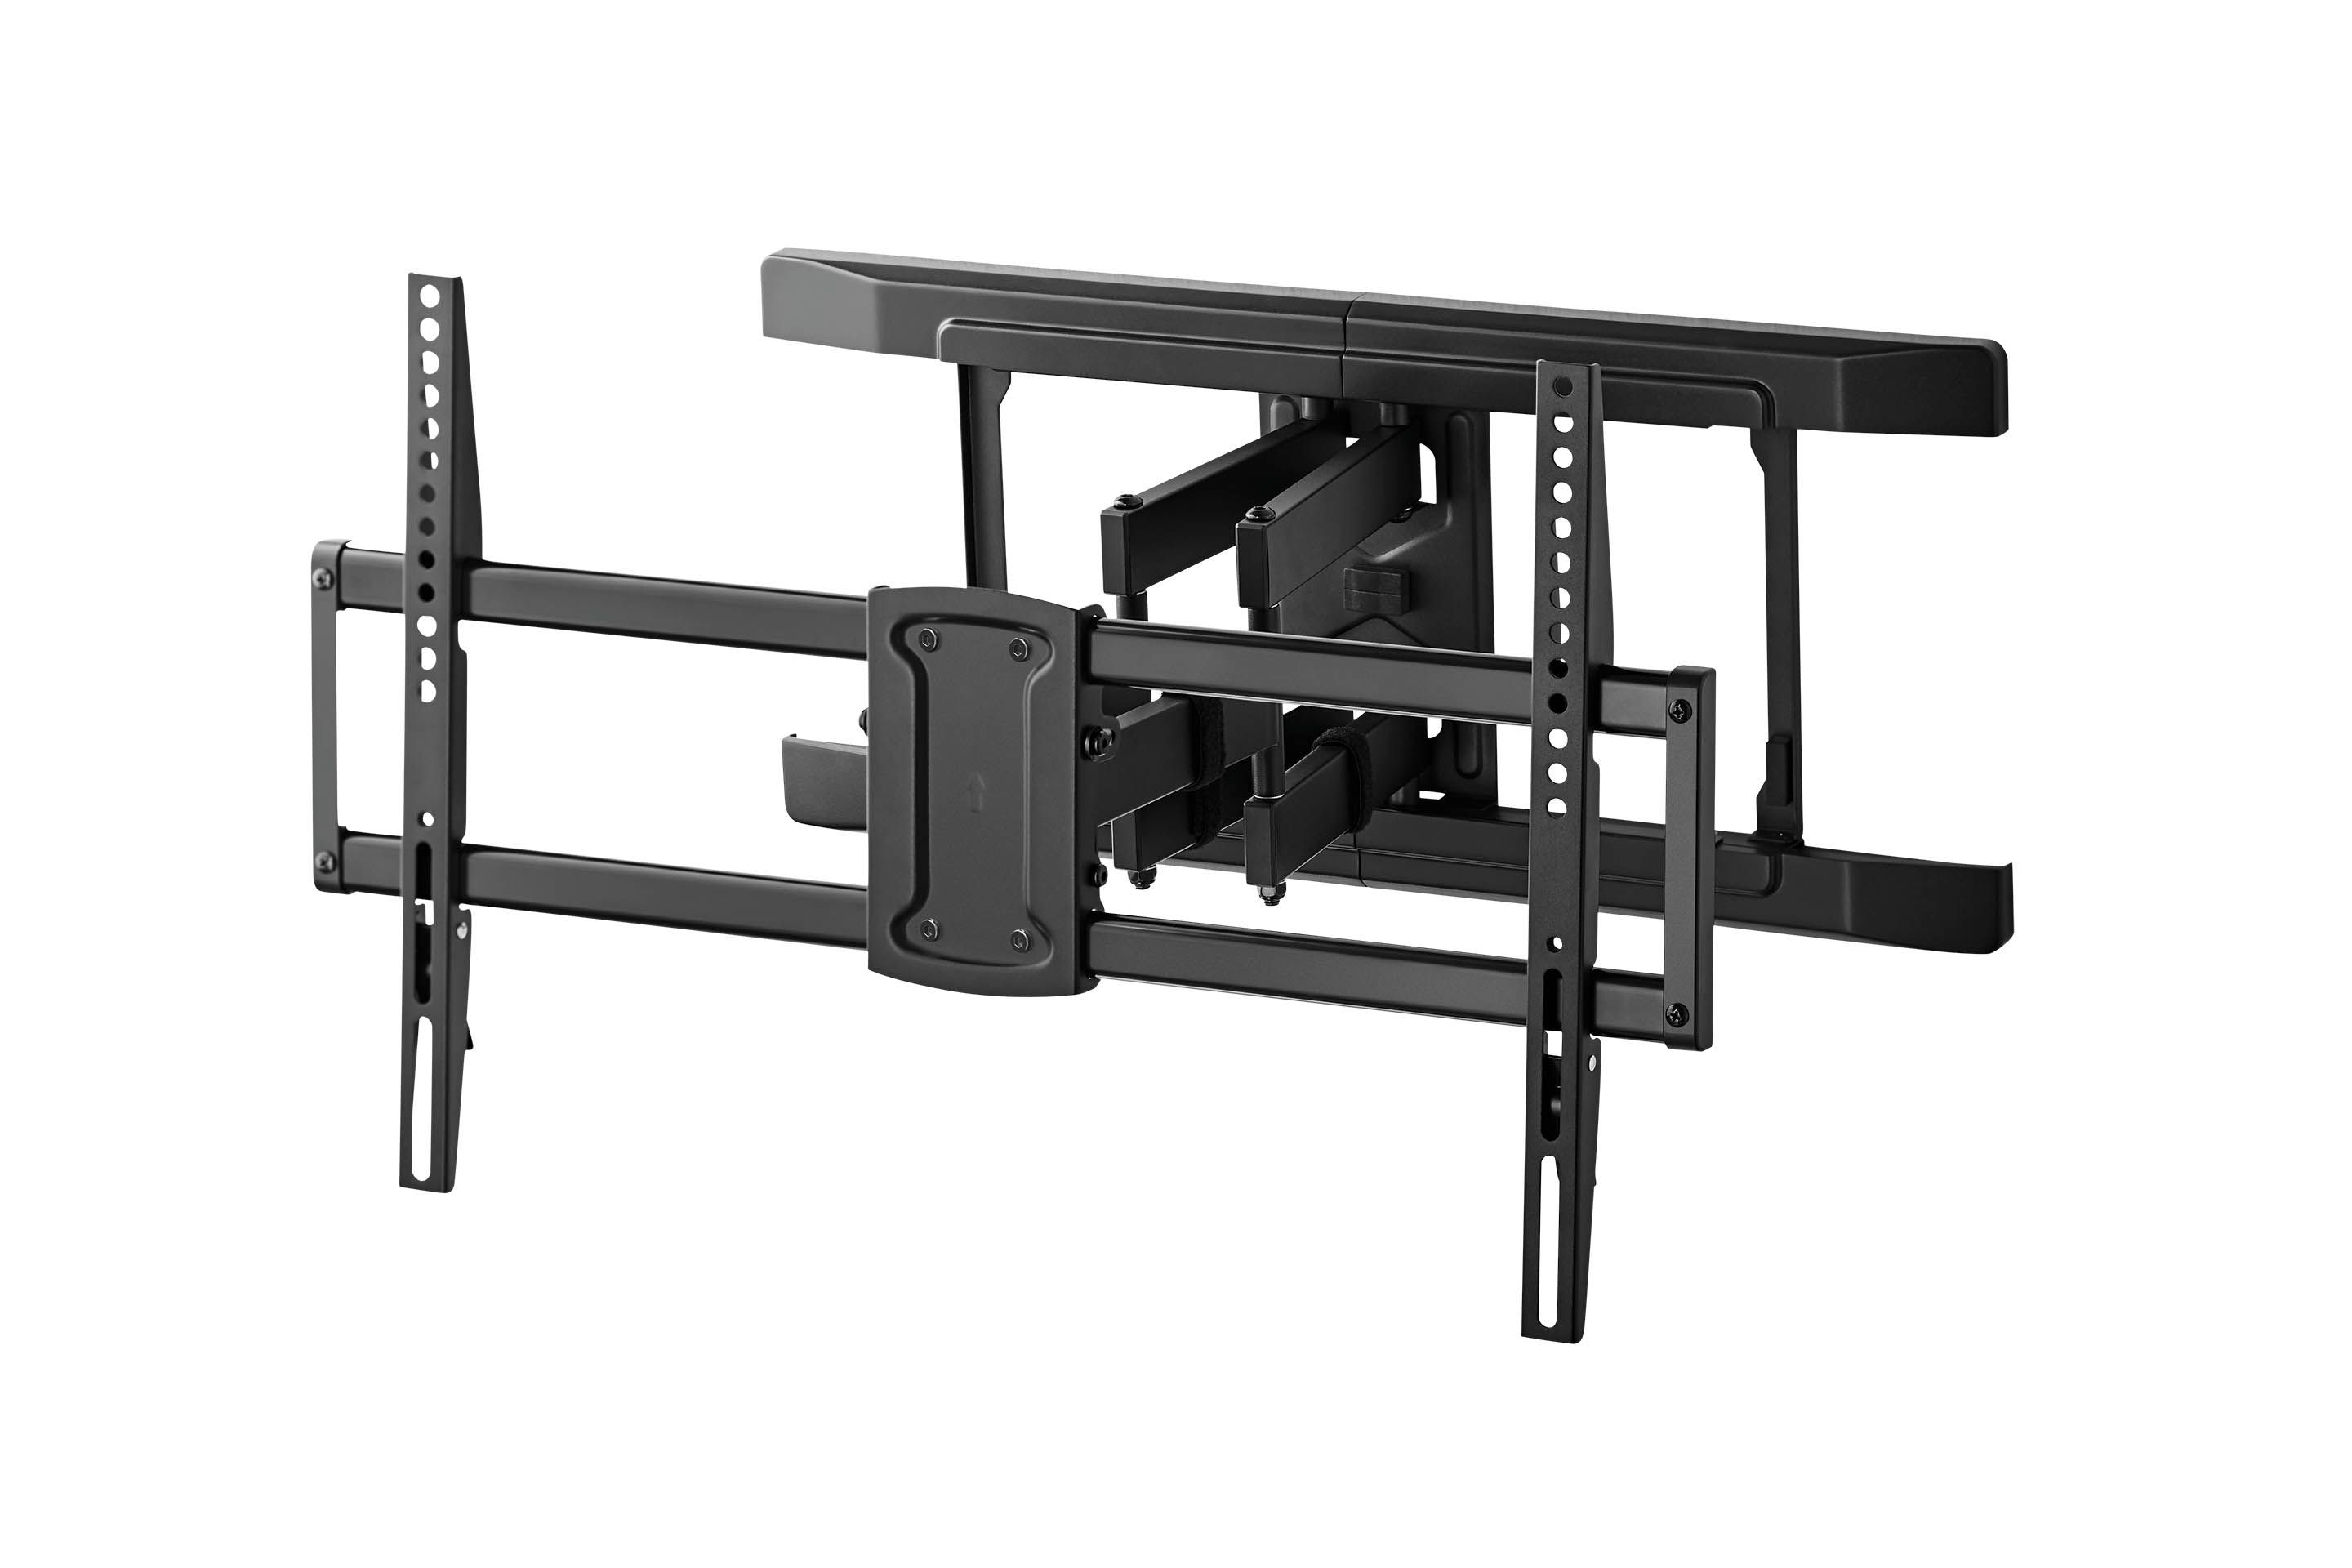 onn. Full Motion TV Wall Mount for TVs 47-84", Dual Swivel Articulating Arms - image 1 of 5